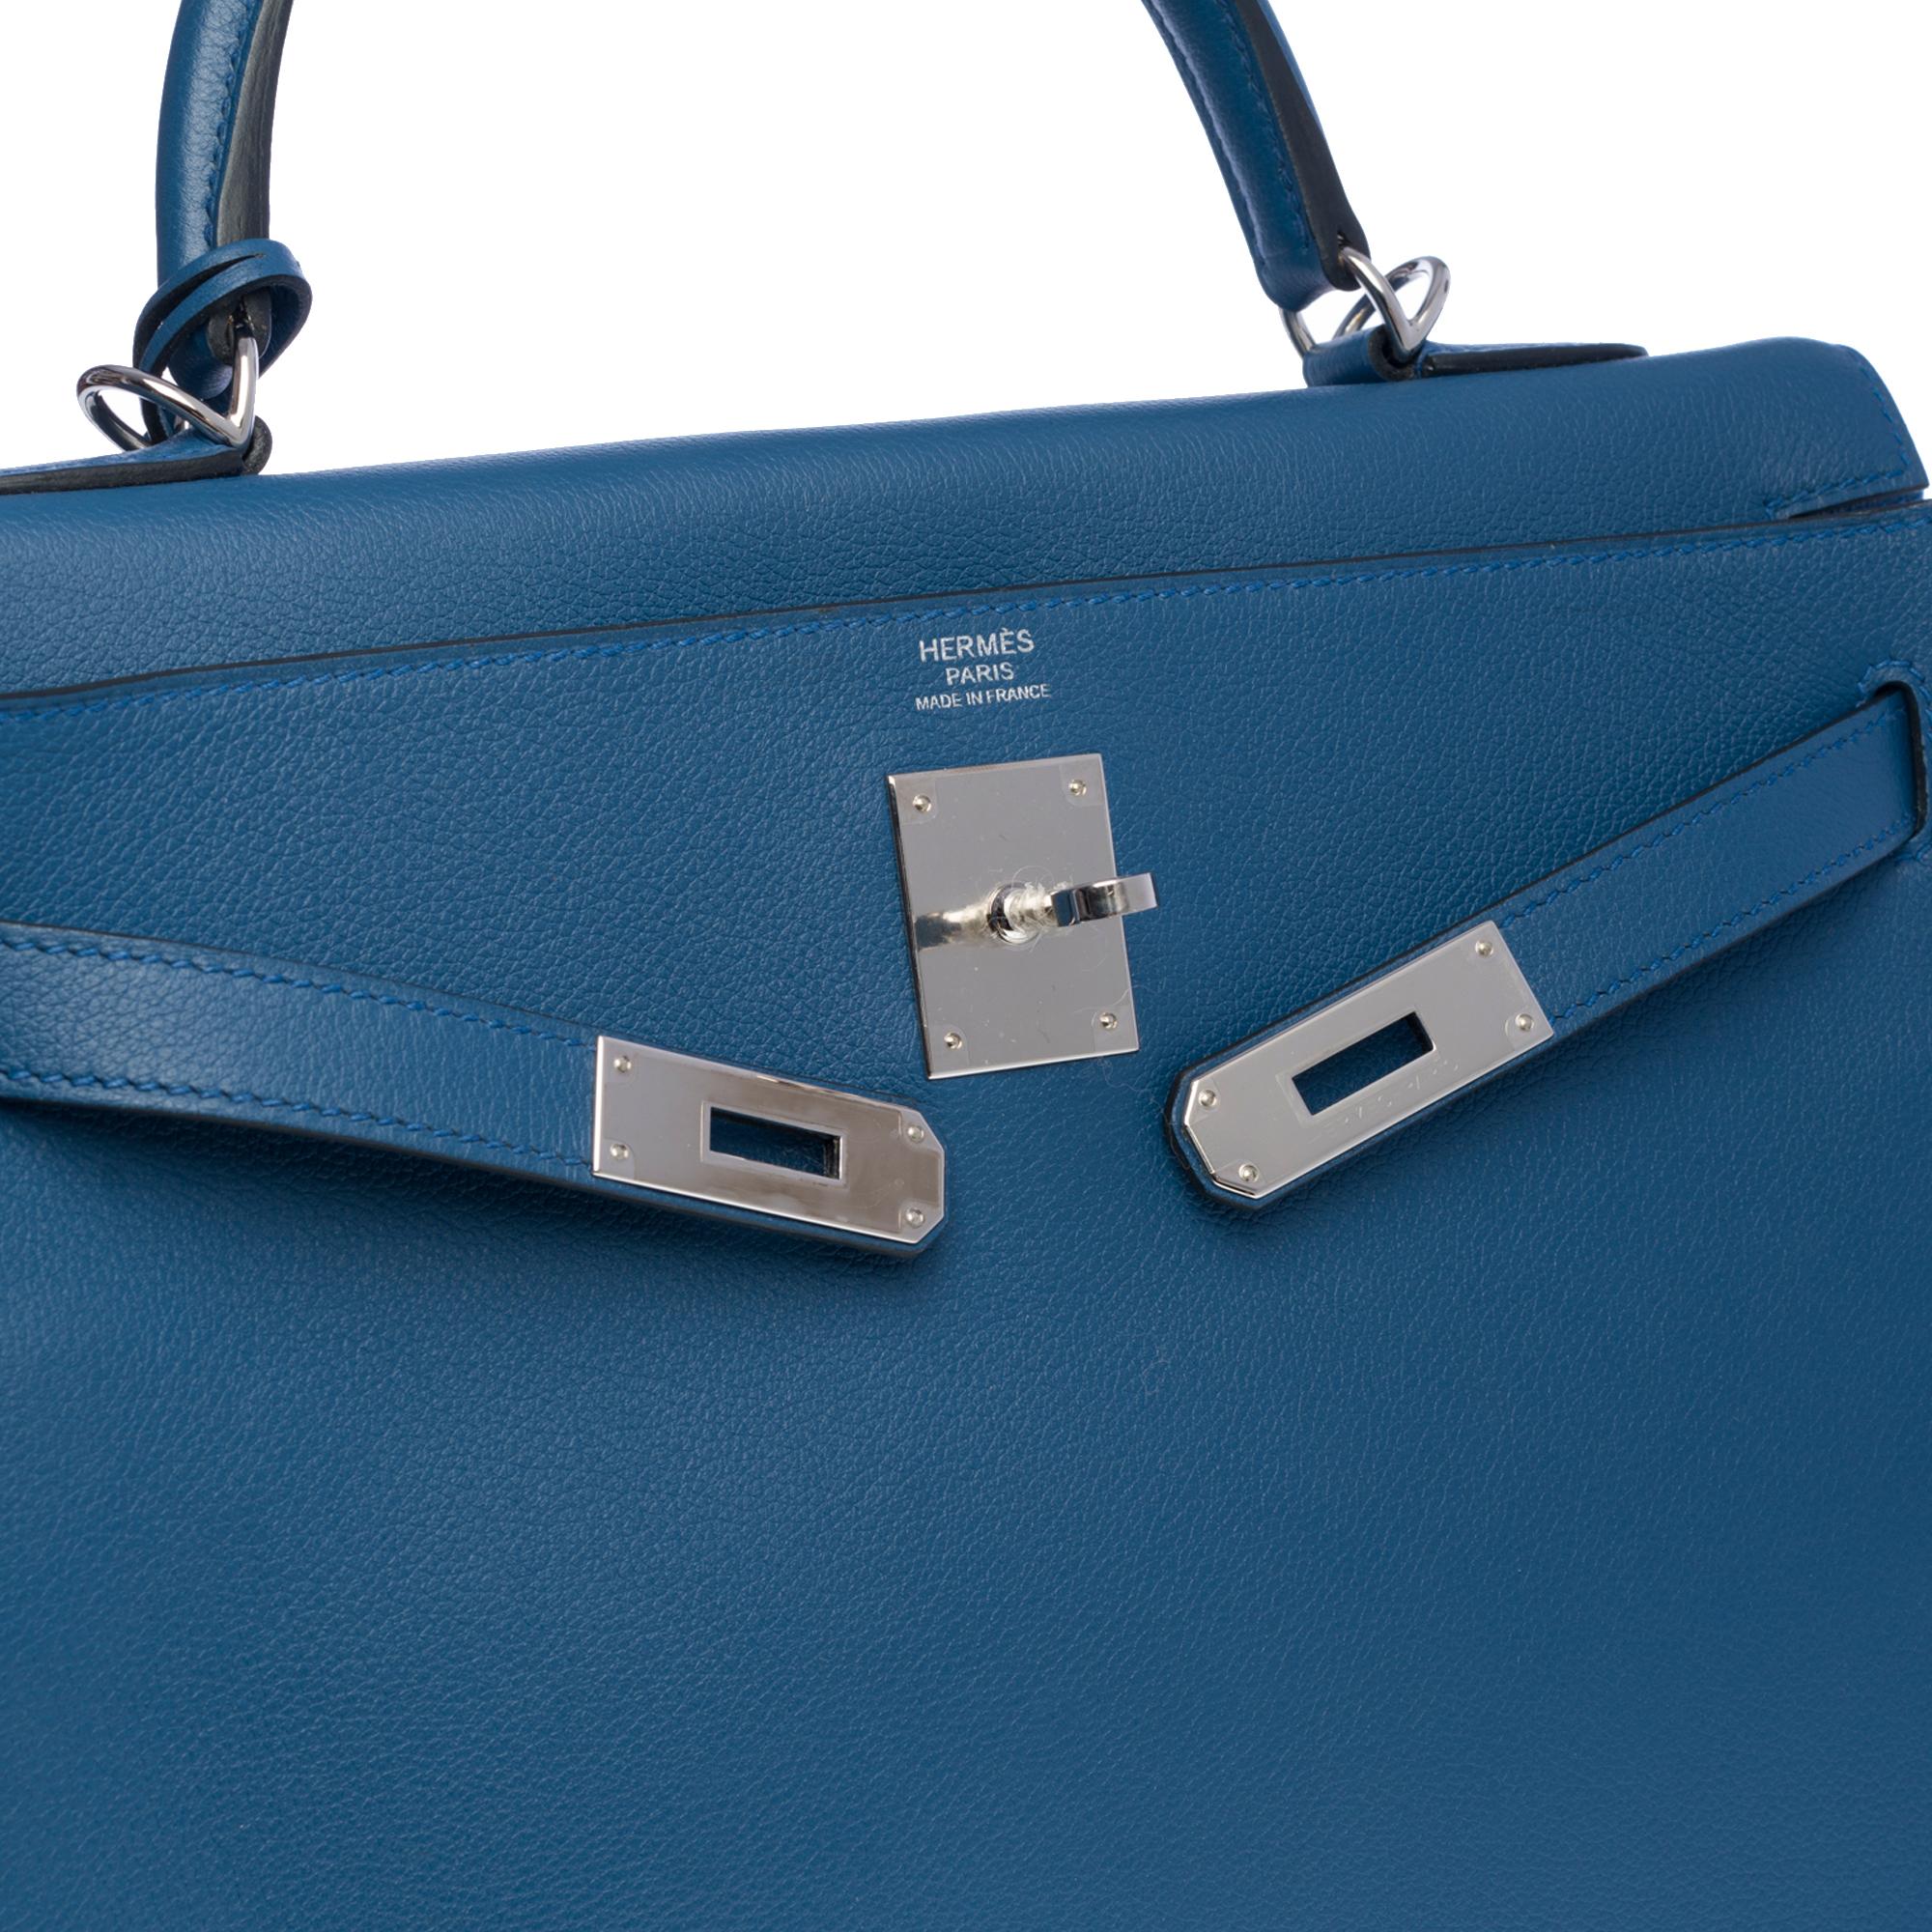 Women's Hermès Kelly 32cm handbag with strap in Evercolor blue Agate leather, SHW